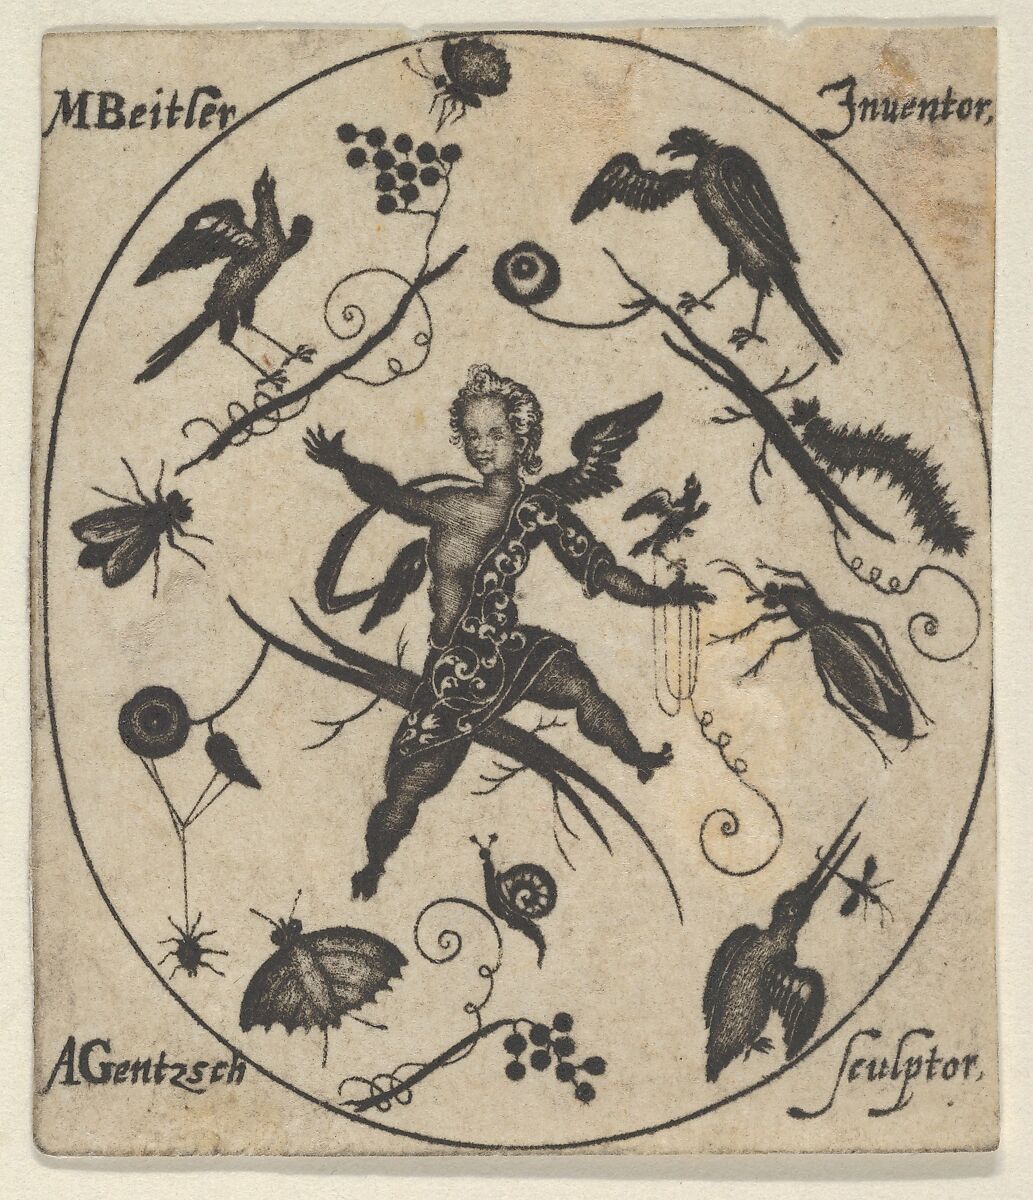 Blackwork Design for Goldsmithwork with a Putto, Birds and Insects, Andreas Gentzsch (German, active Augsburg, ca. 1600), Engraving and blackwork 